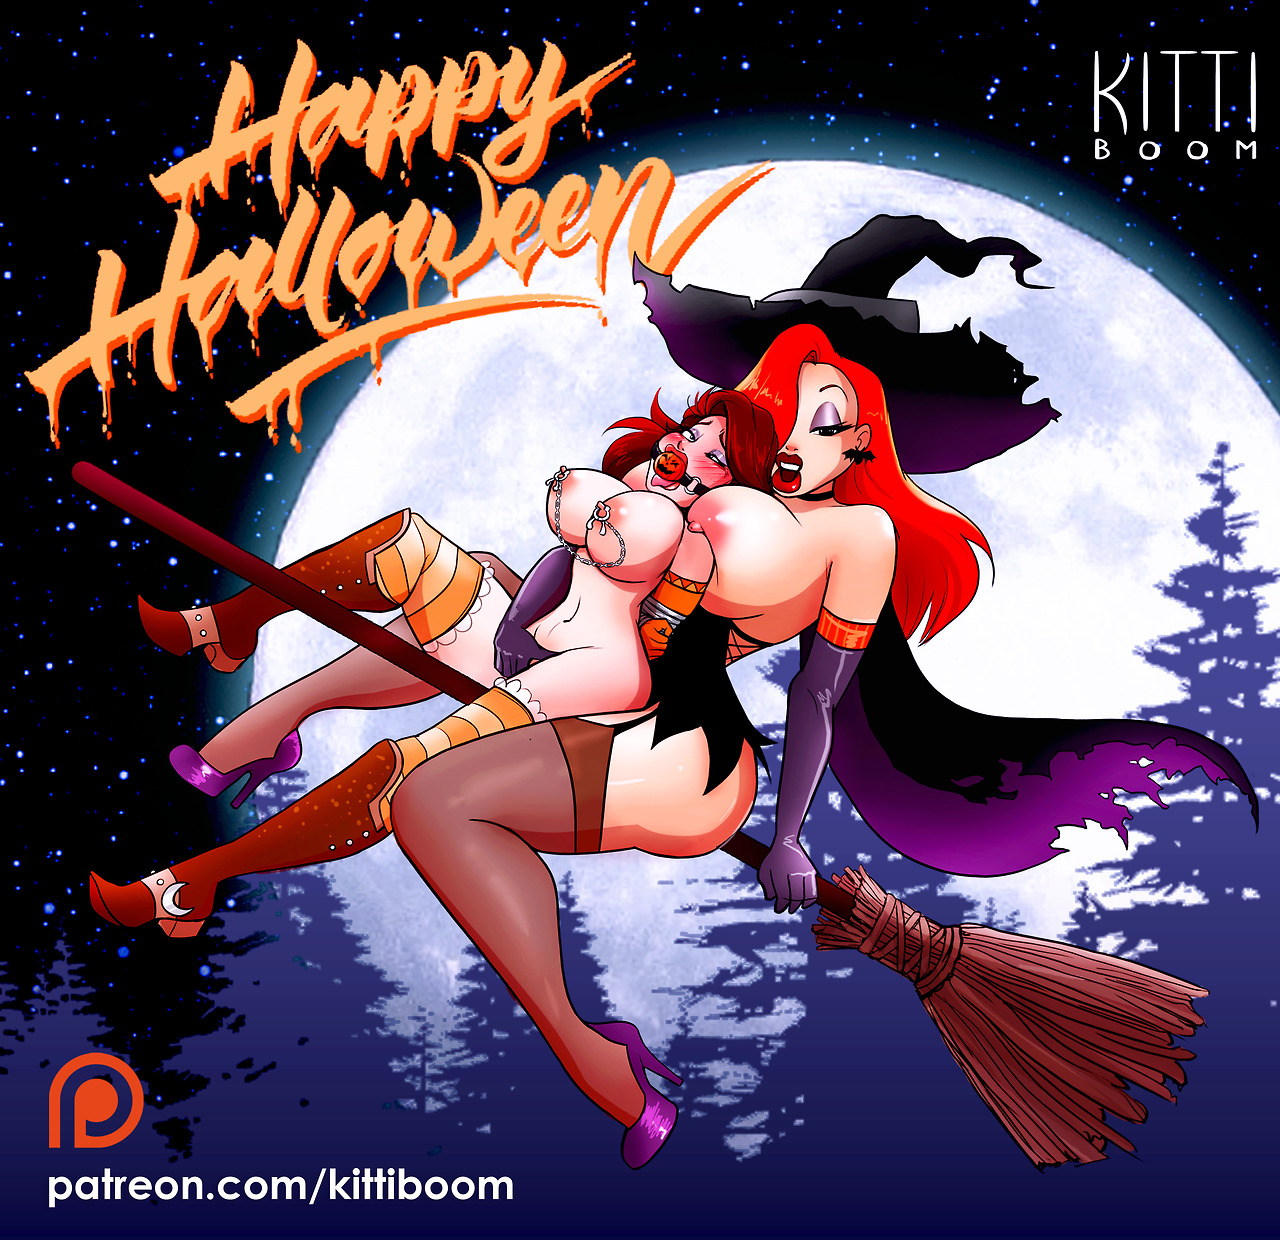 kittiboom: happy halloween! a very happy and sexy halloween to you all! october was